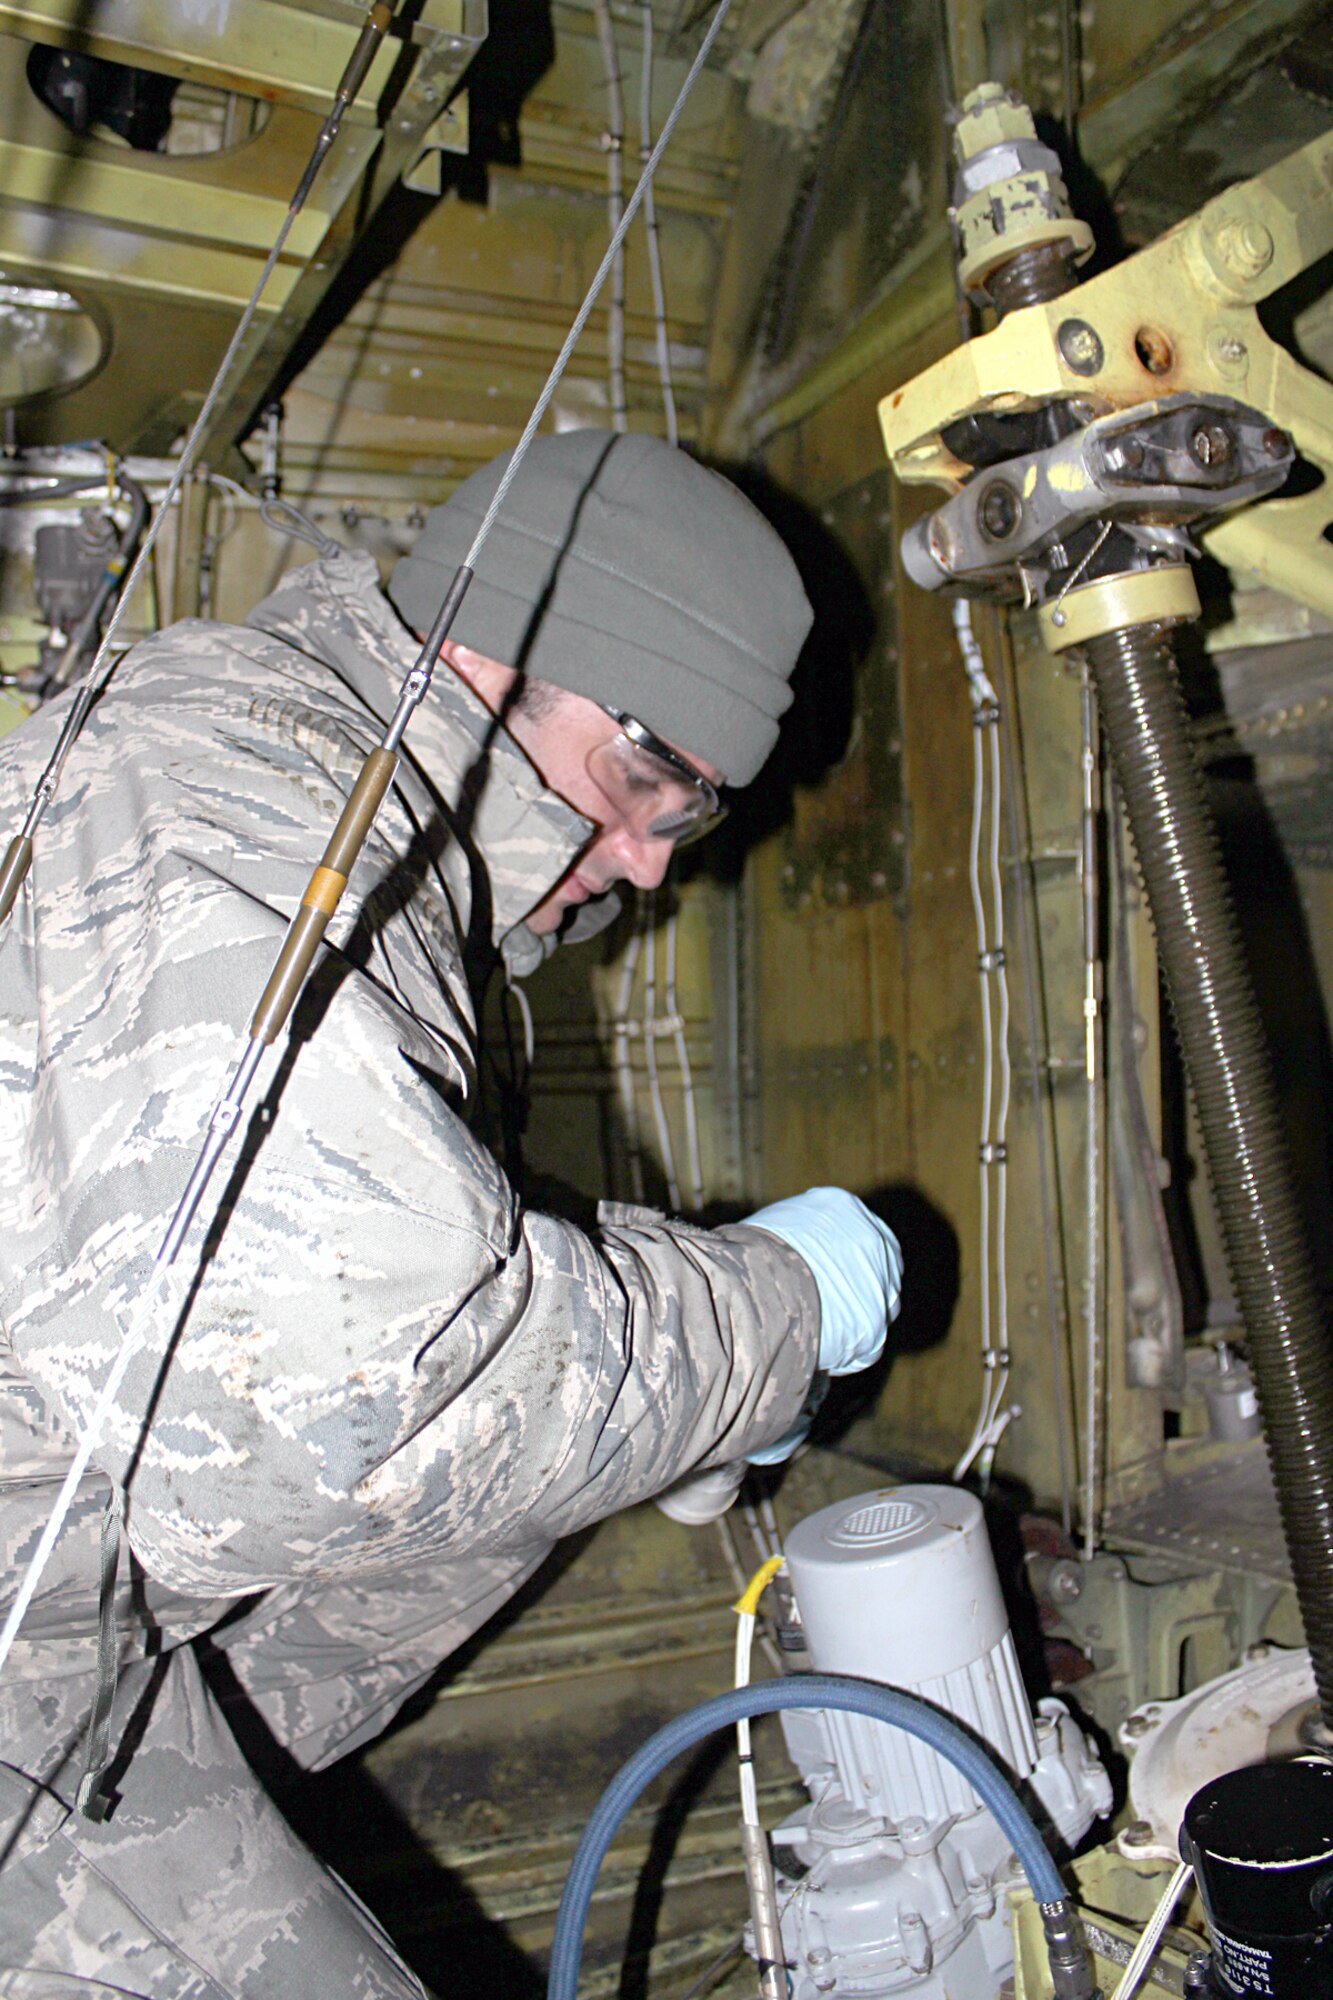 141206-Z-VA676-032 – Working inside the aircraft’s fuselage, Airman 1st Class Mike Fontana, 191st Maintenance Squadron,  prepares to lubricate the metal rod that raises and lowers the boom on a KC-135 Stratotanker at Selfridge Air National Guard Base, Mich., Dec. 6, 2014. Fontana has been working as a crew chief at Selfridge for about a year. (U.S. Air National Guard photo by Tech. Sgt. Dan Heaton)